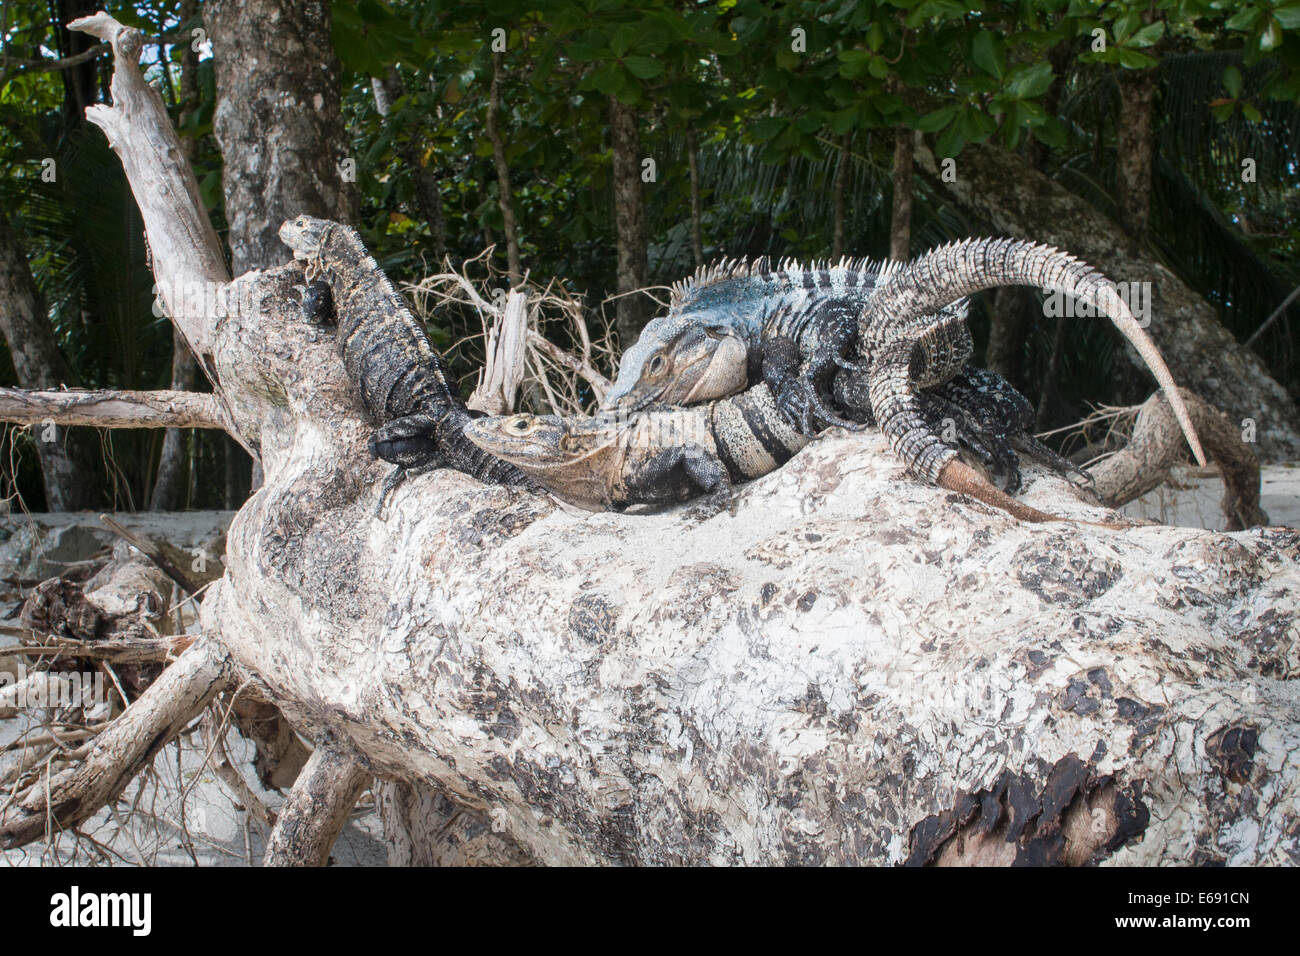 A pair of black spiny-tailed iguanas (Ctenosaura similis) mating.  Photographed in Costa Rica. Stock Photo